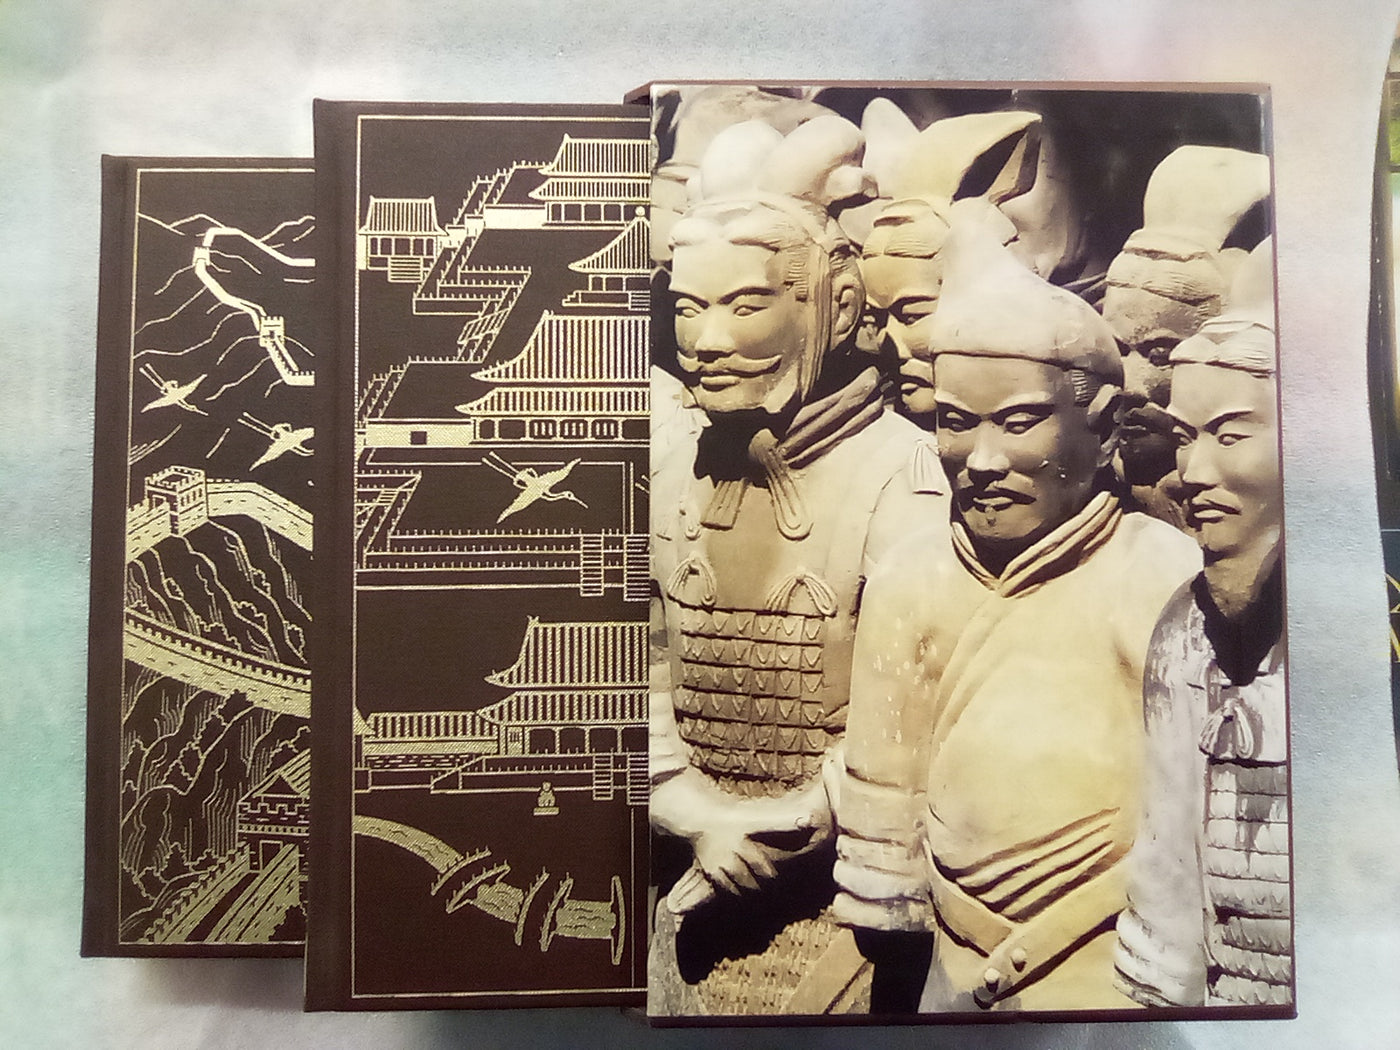 Folio Society - A History of Chinese Civilisation (2 Volumes in Slipcase) by Jacques Gernet